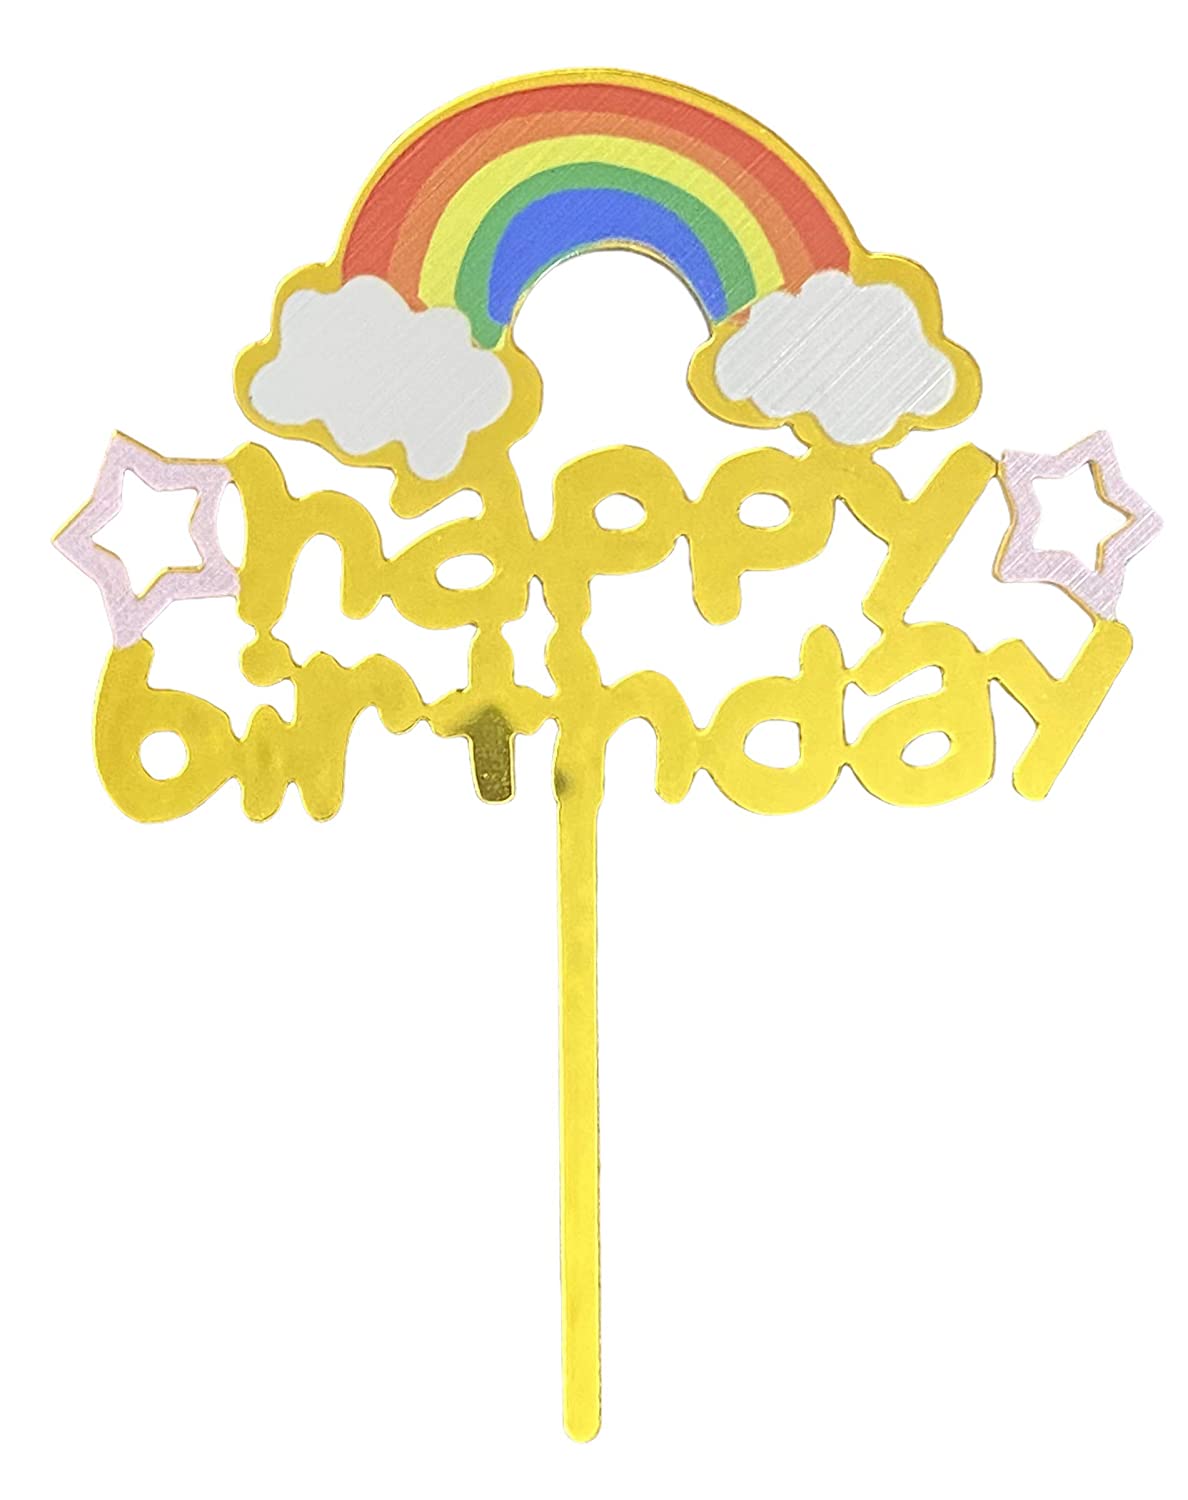 Acrylic Rain Bow and Clouds Birthday Cake Topper | Cake Supplies Decorations